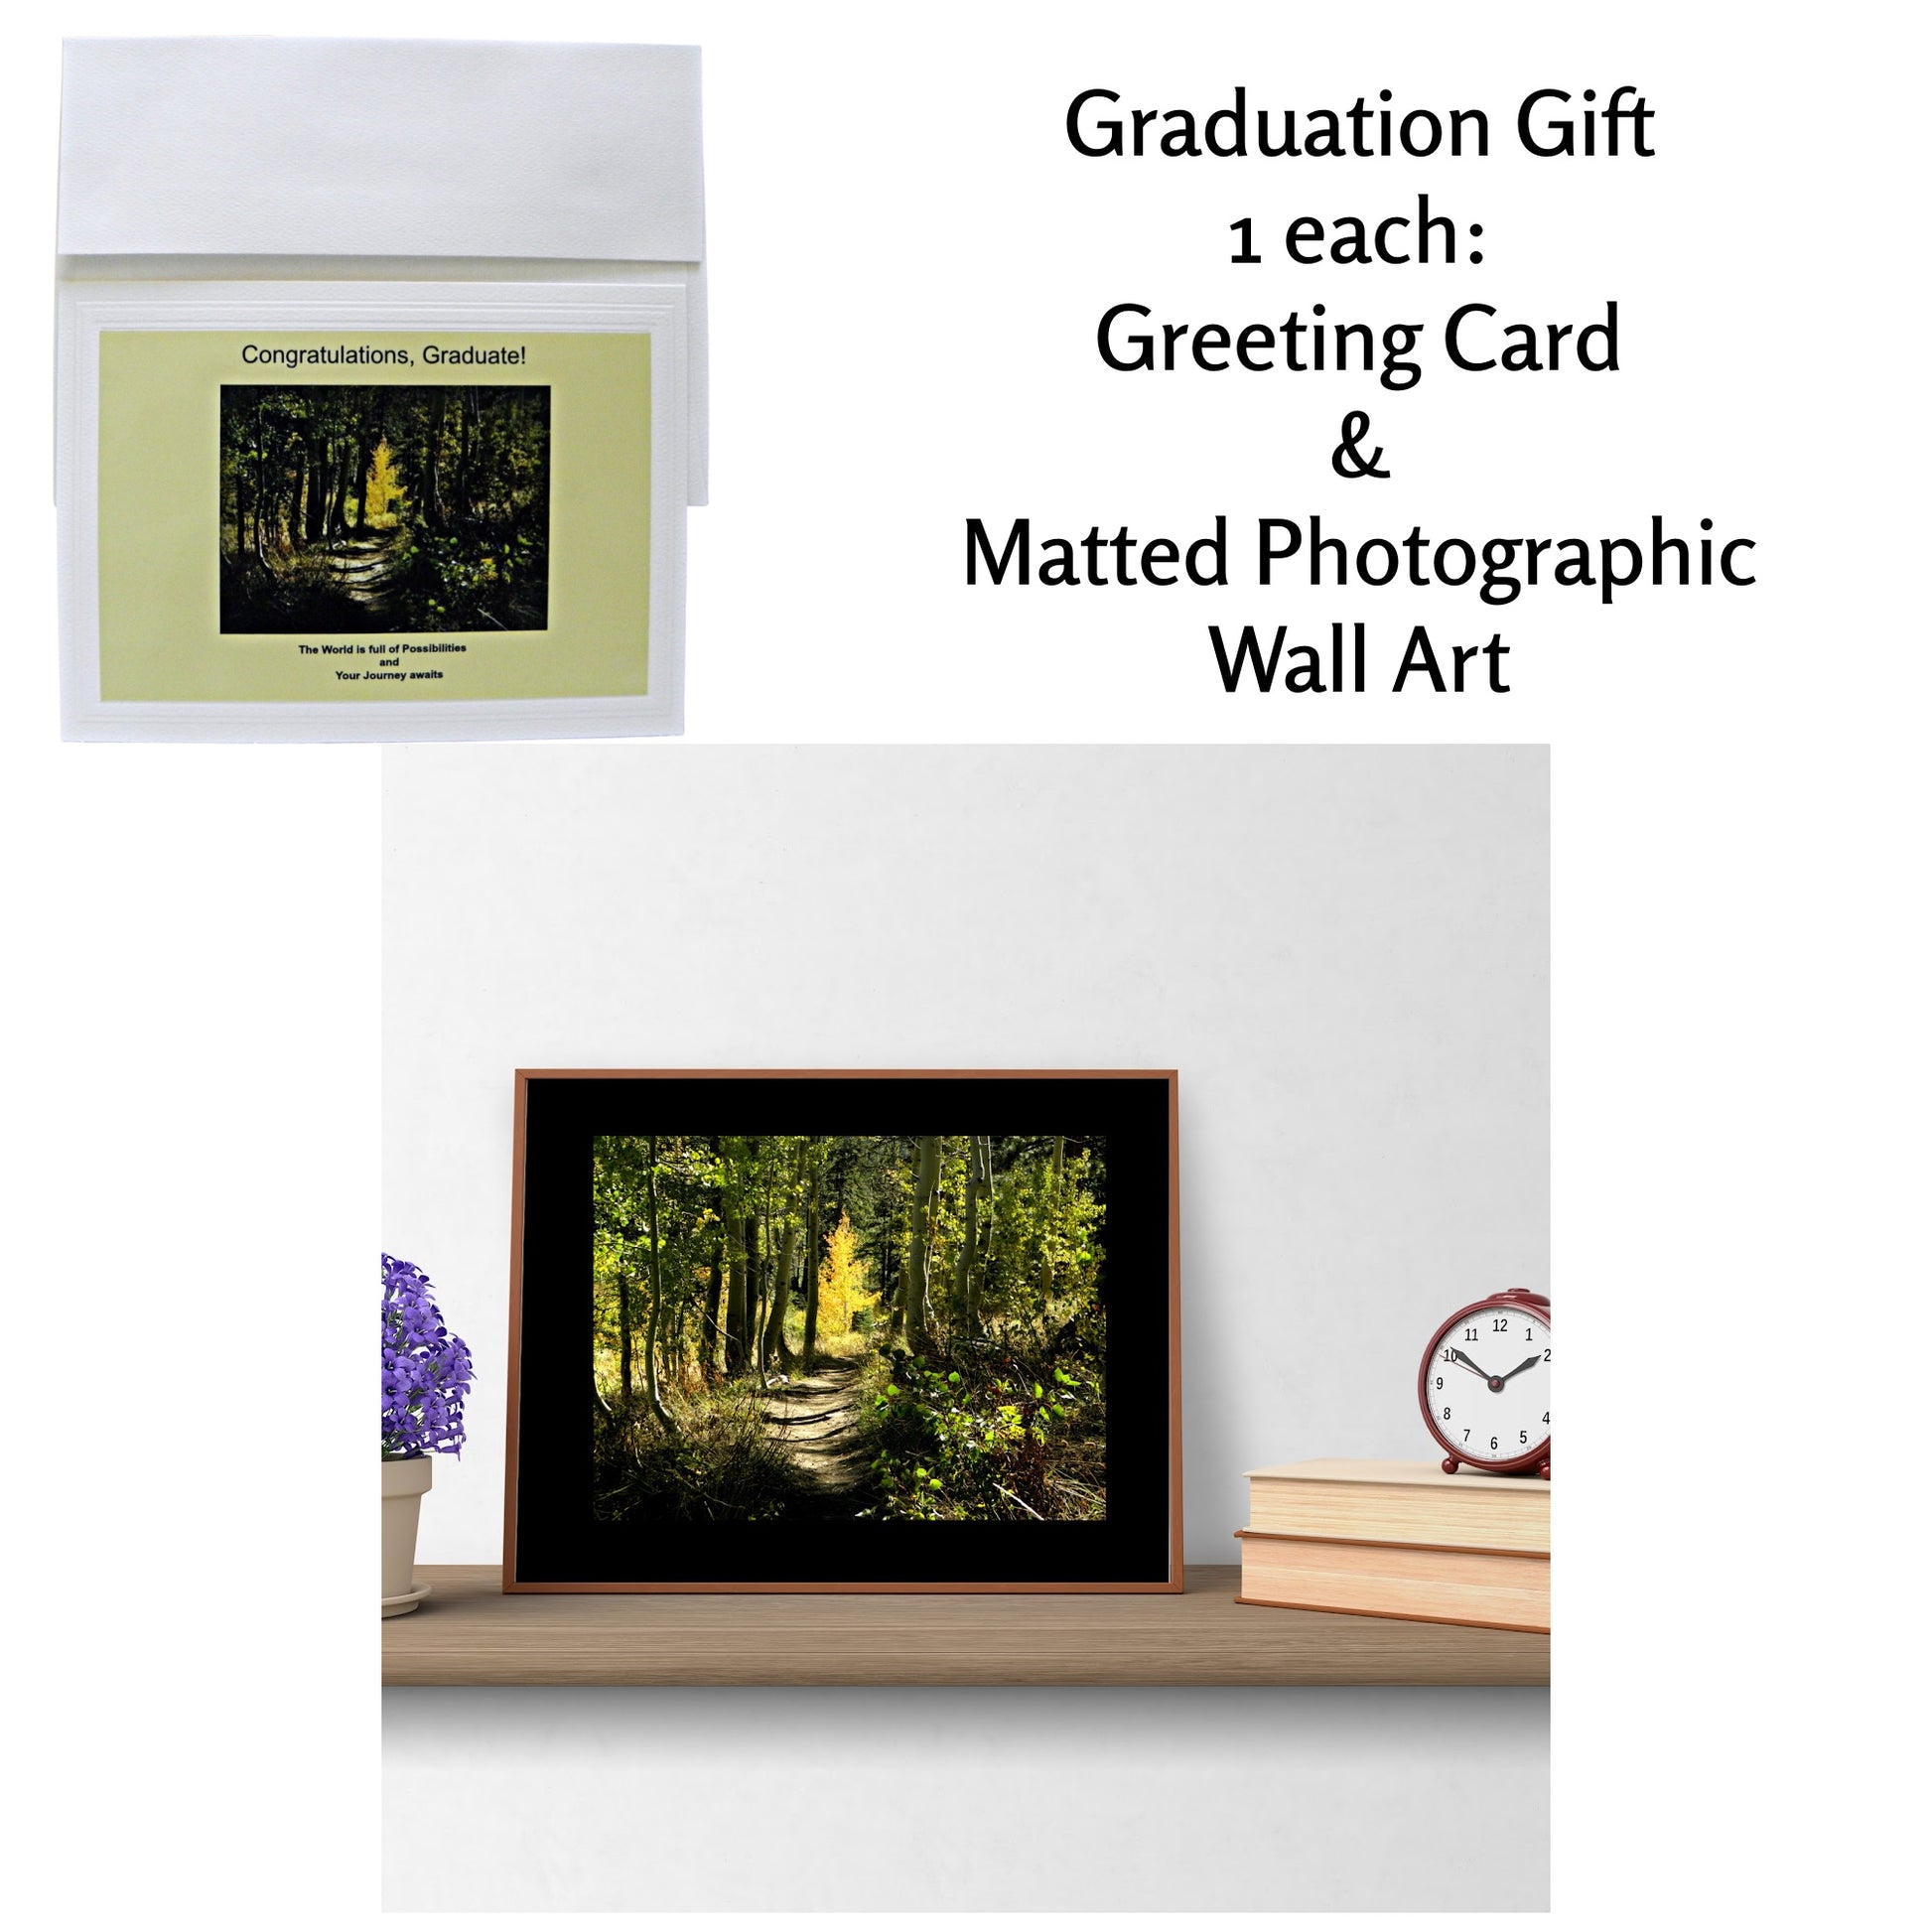 Graduation Gift Set: 1 Card and 1 matted wall art